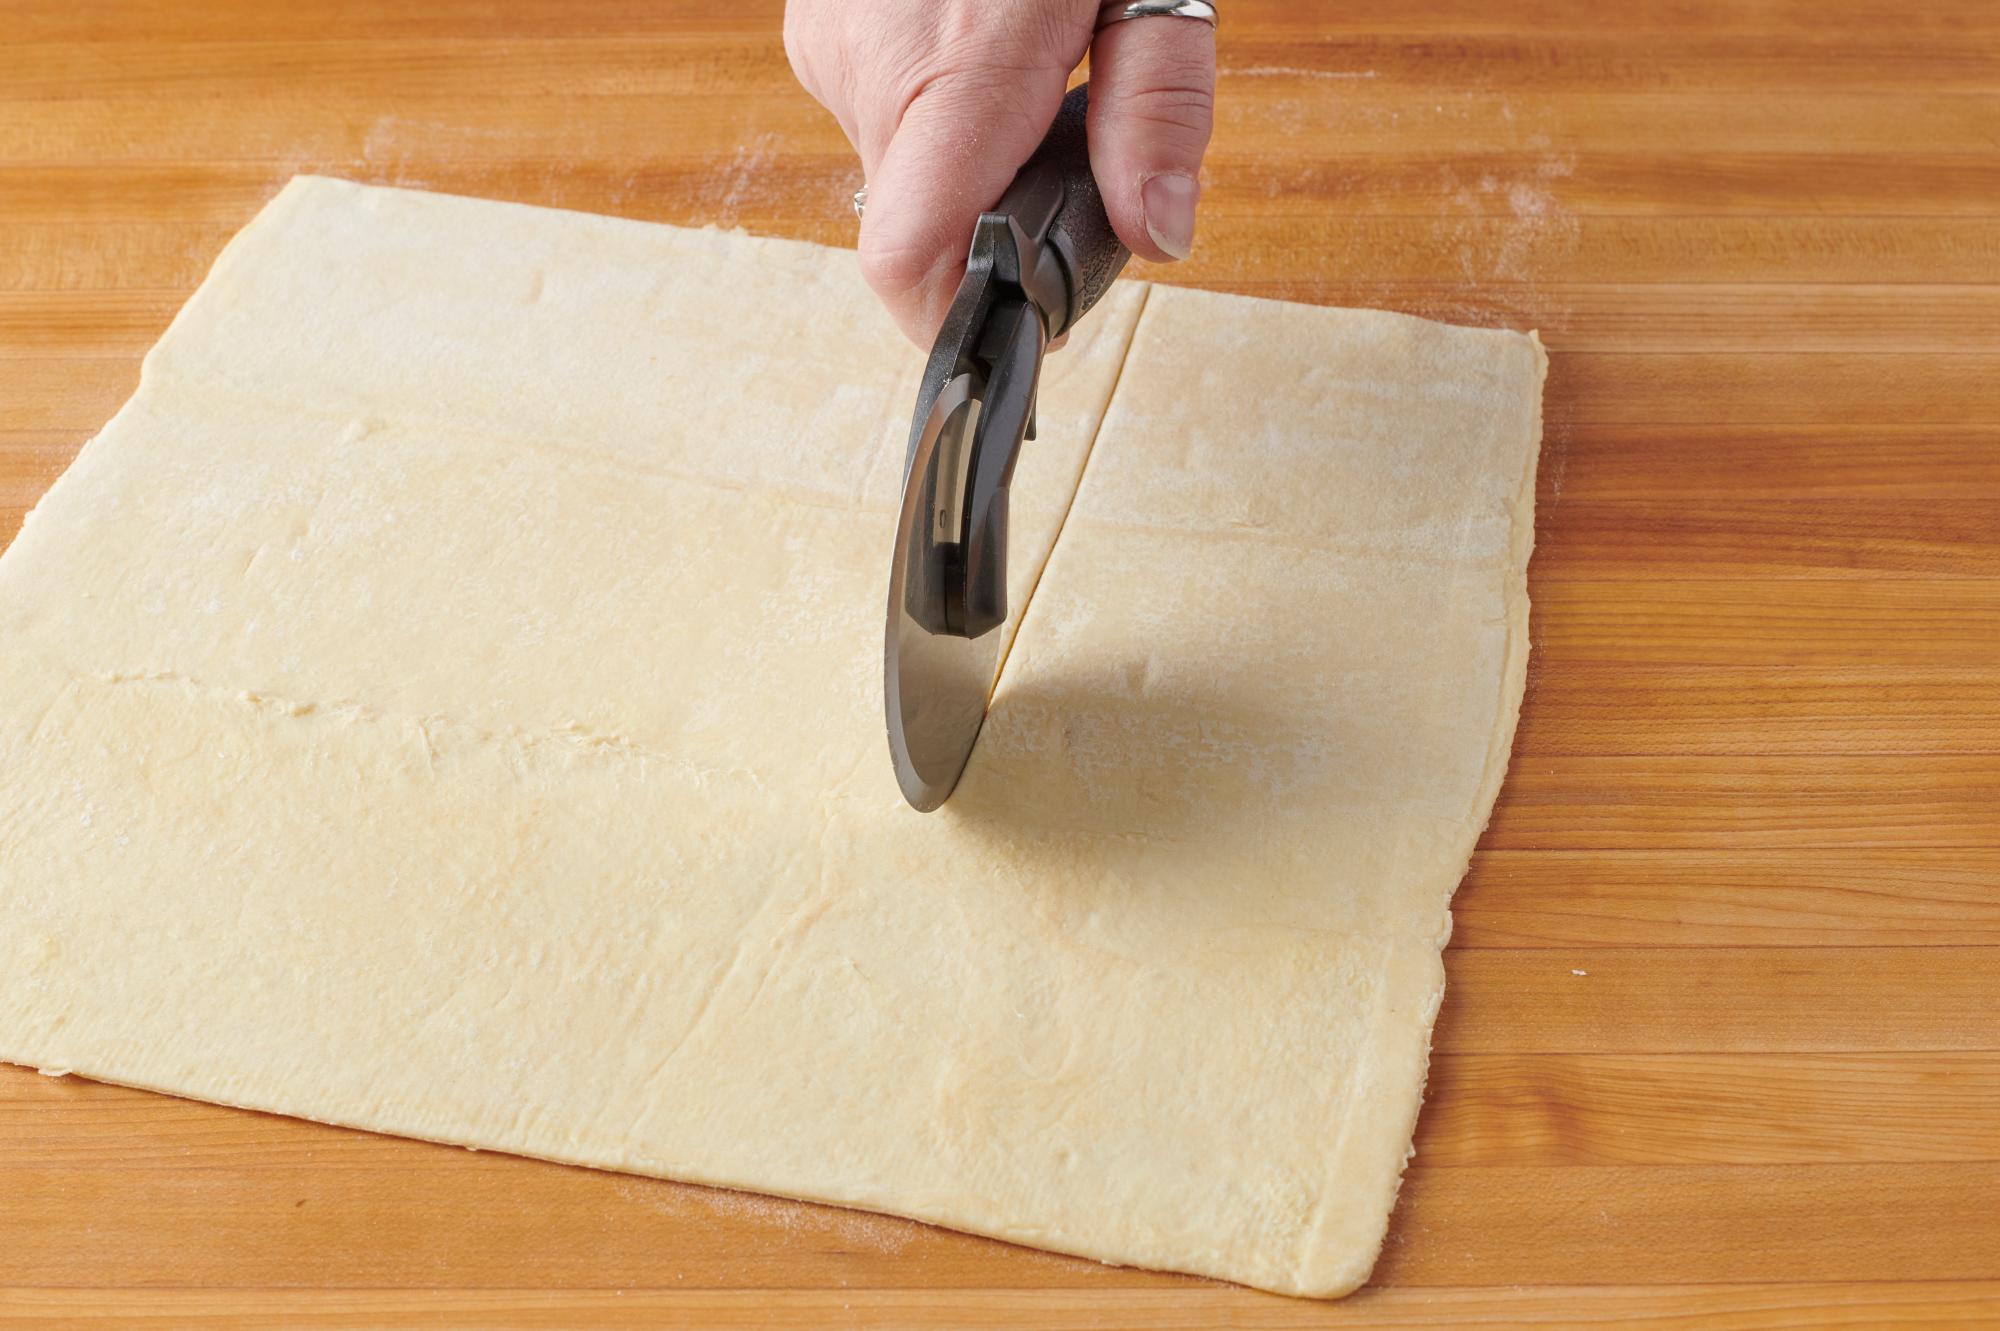 Cutting the dough with a Pizza Cutter